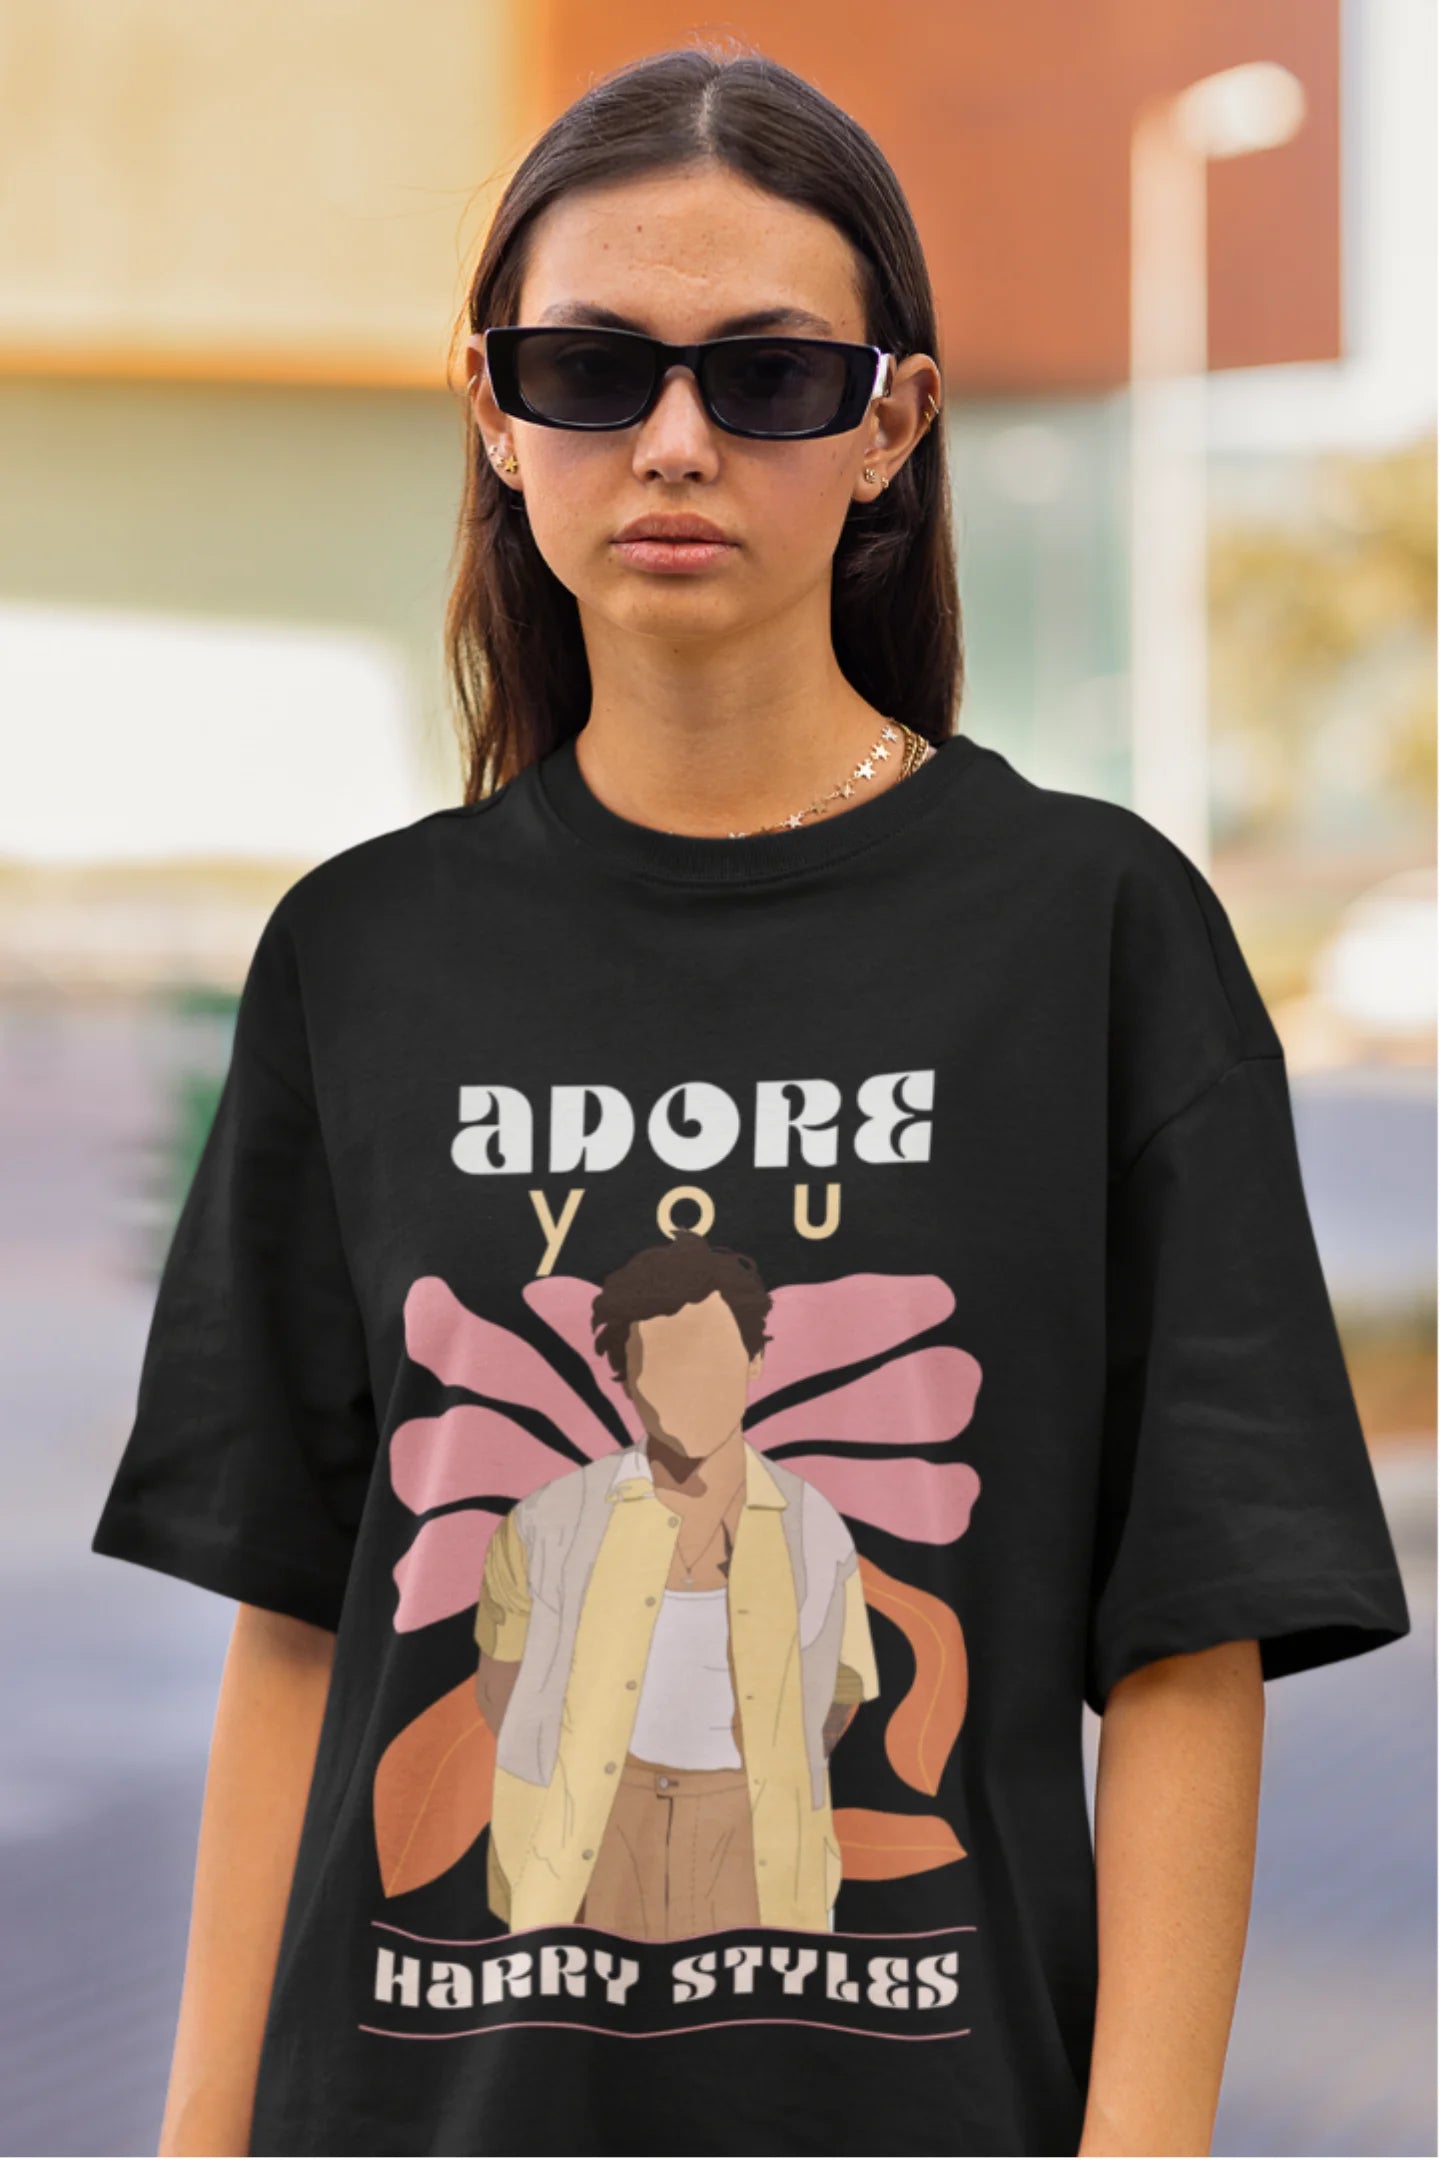 Third image of woman wearing black oversized t-shirt featuring 'Adore You' inspired design - ideal for fans of Harry Styles and One Direction